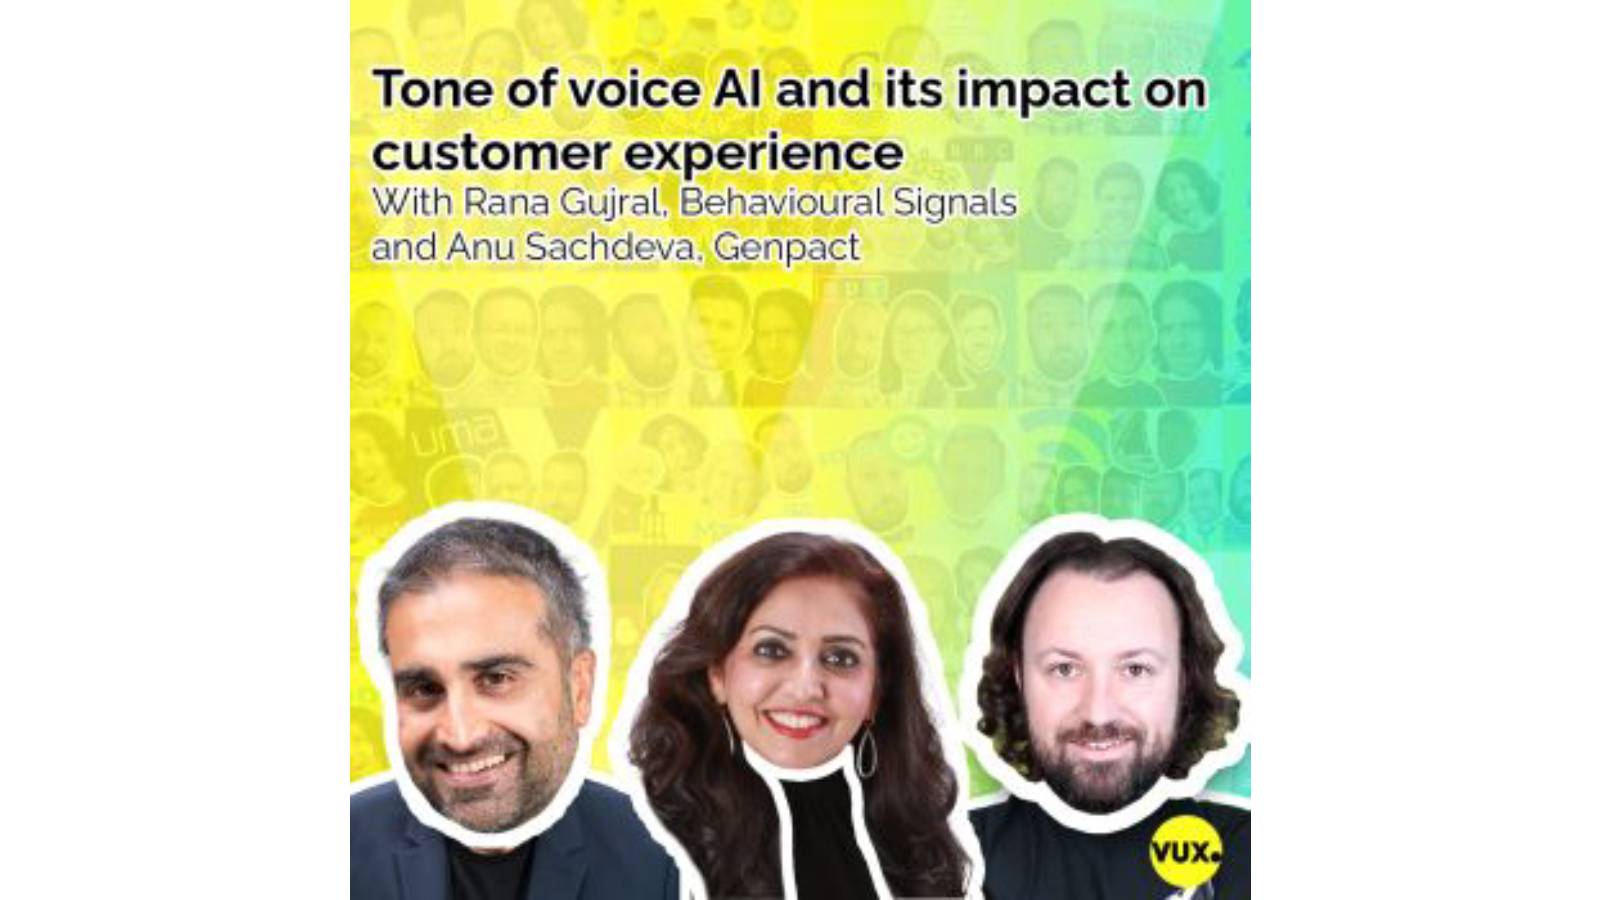 Tone-of-voice-AI-and-its-impact-on-customer-experience-GENPACT-BEHAVIORAL-SIGNALS